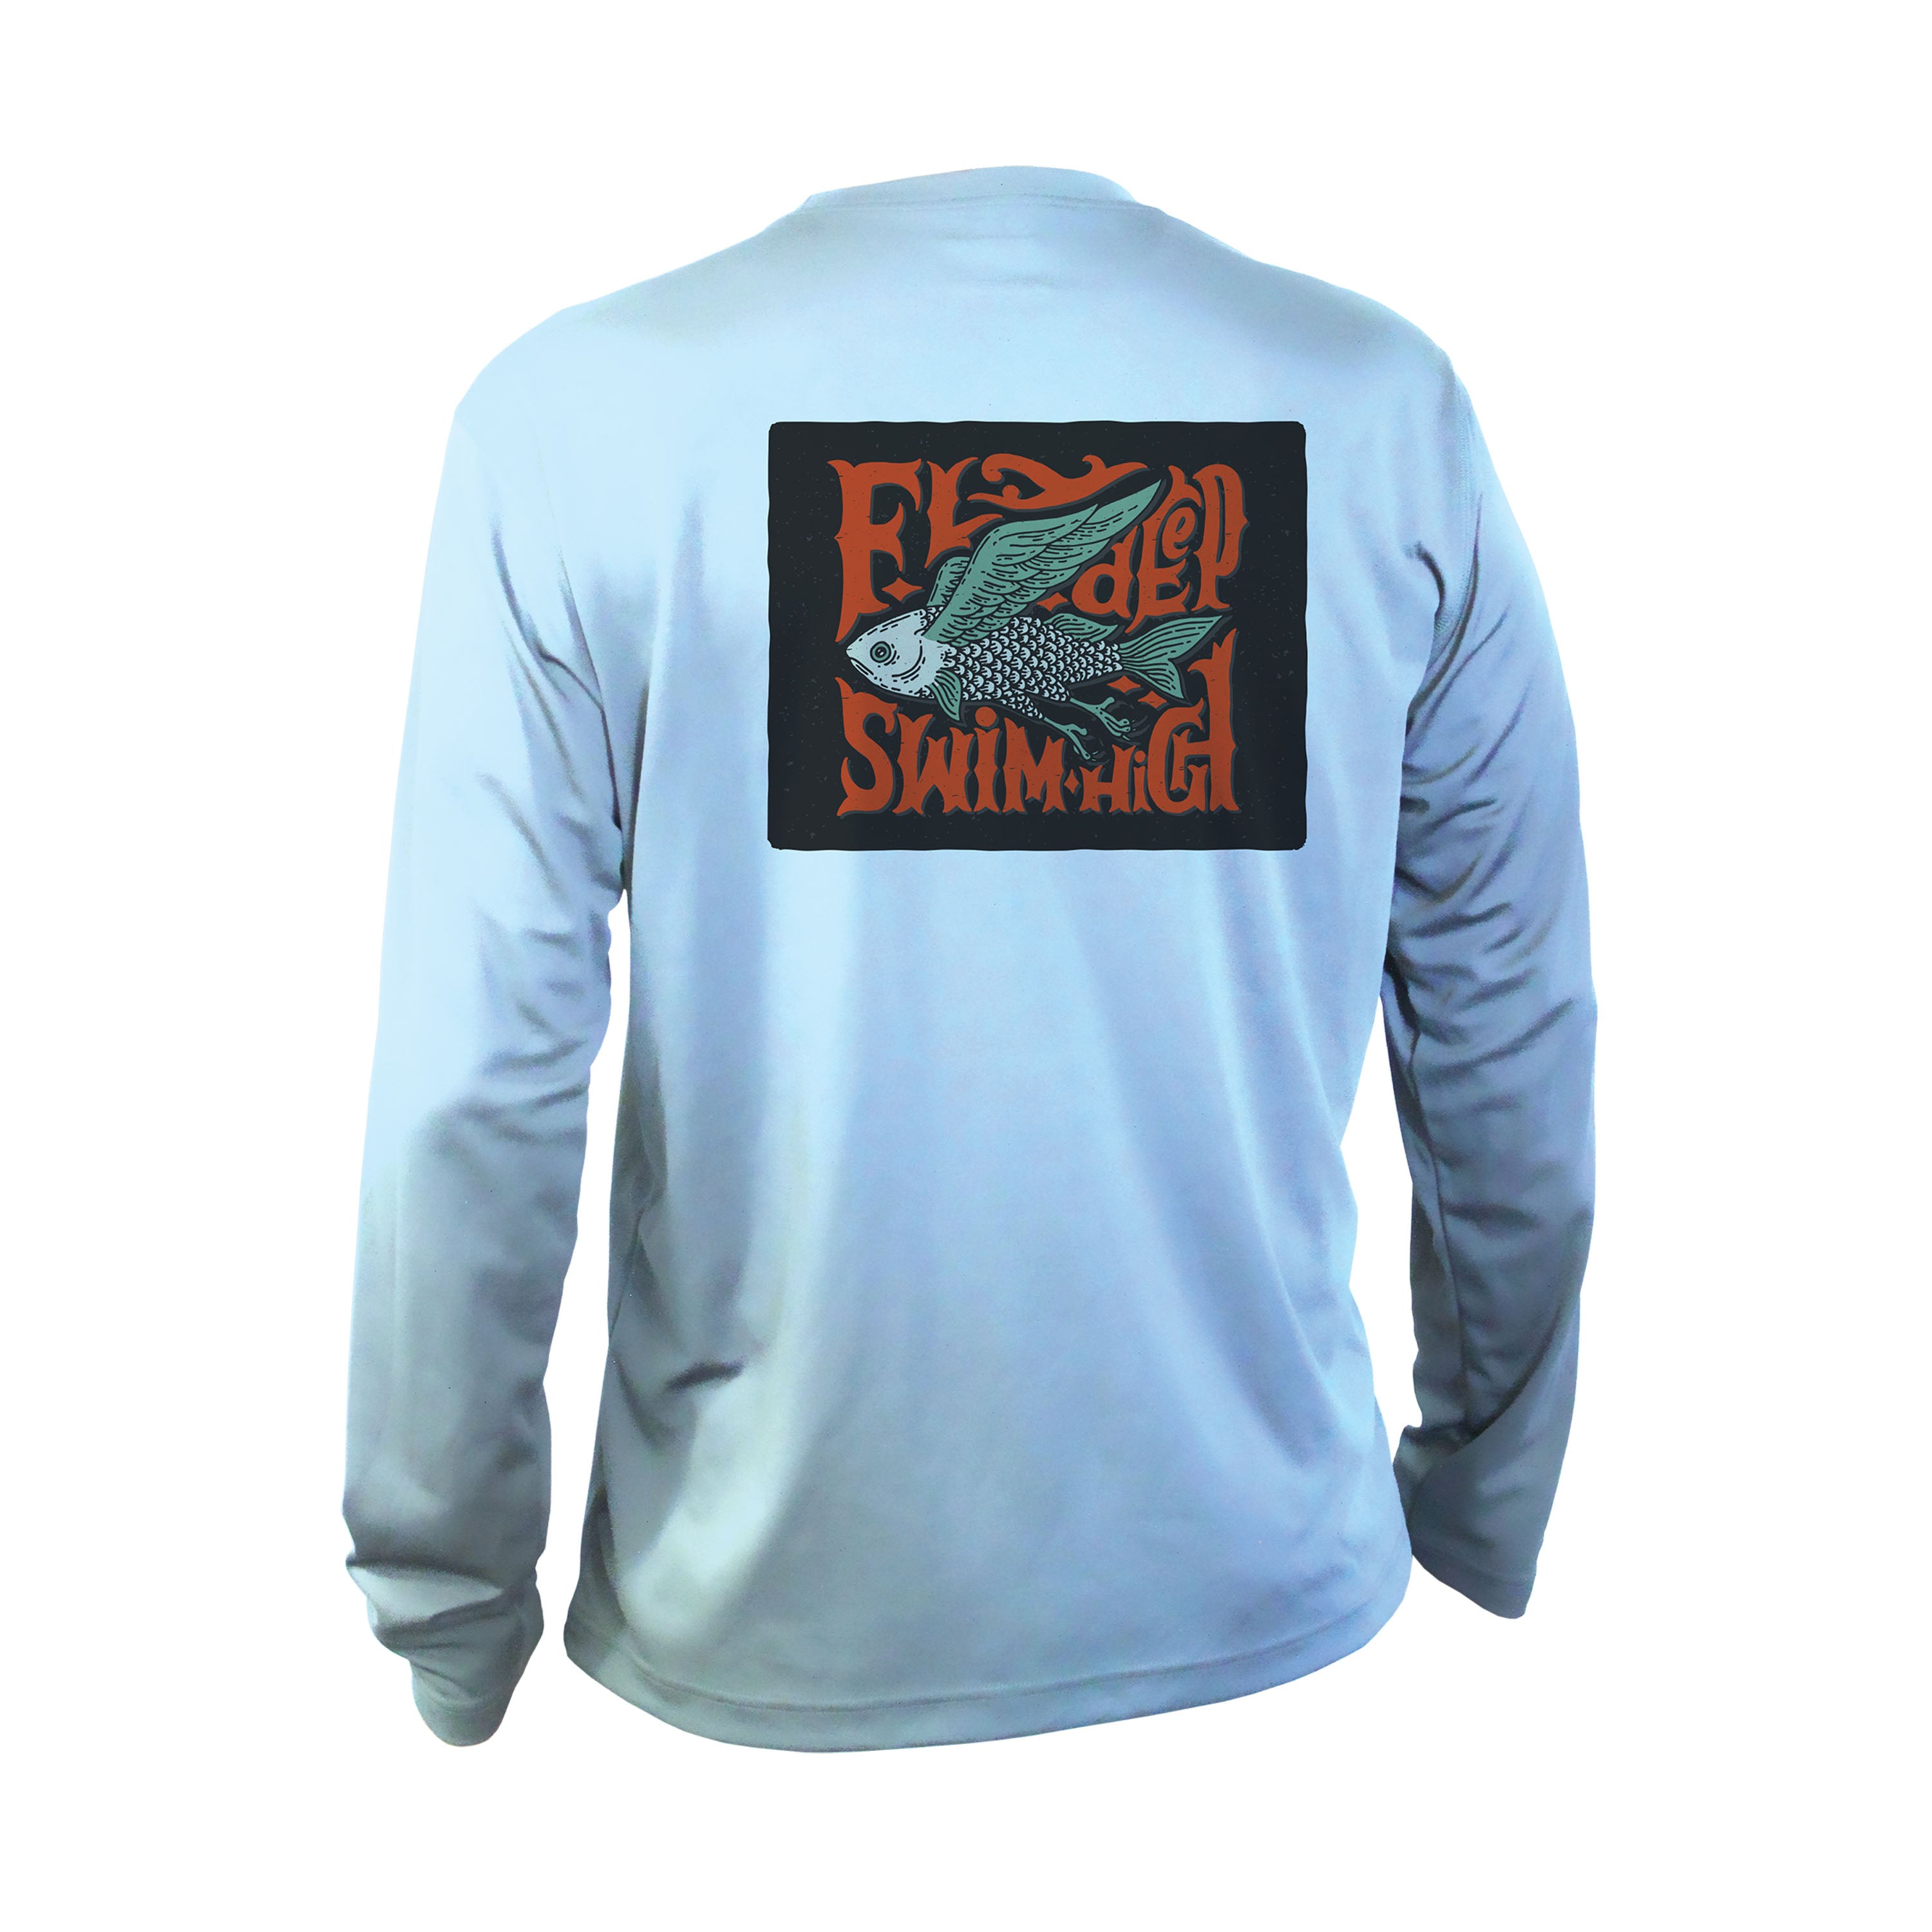 Sun Shirts for Men Long Sleeve UV, Giveaway Service